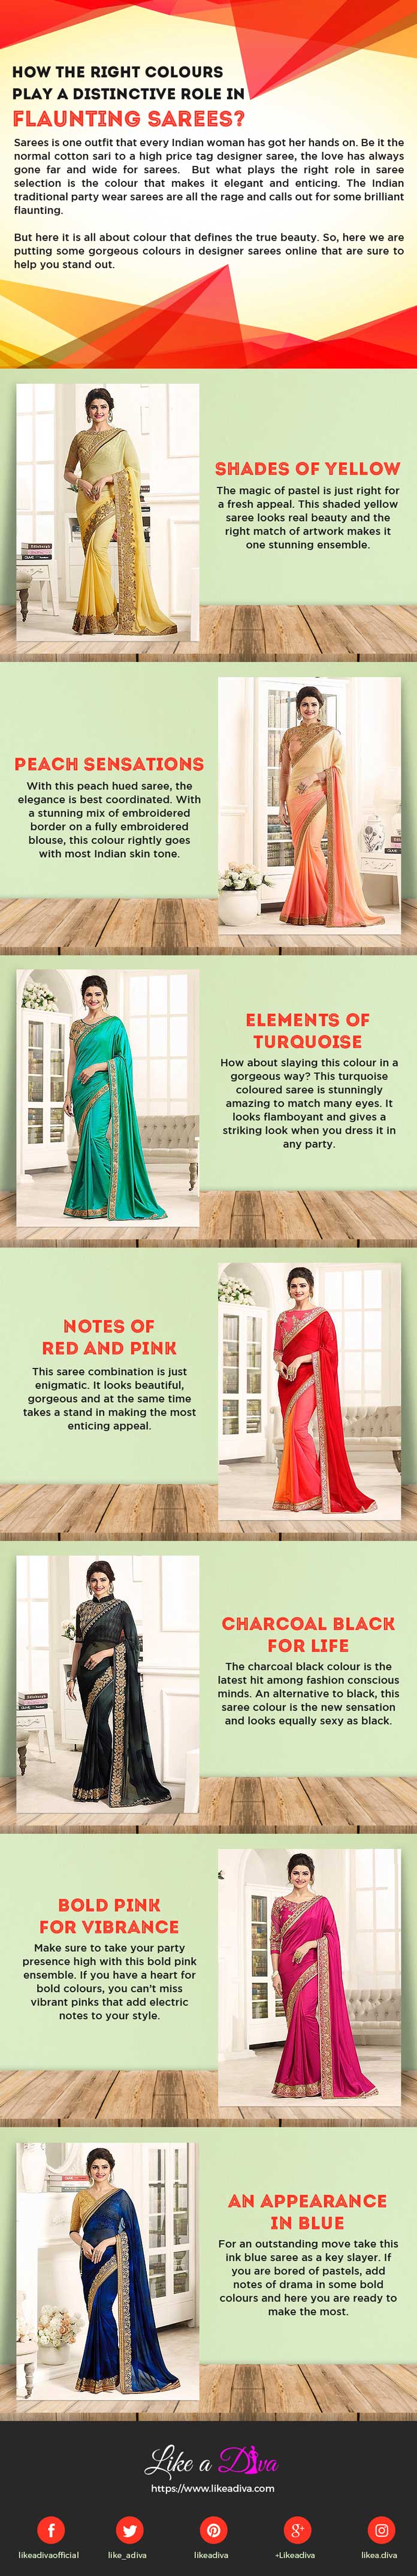 How-the-right-colours-play-a-distinctive-role-in-flaunting-sarees